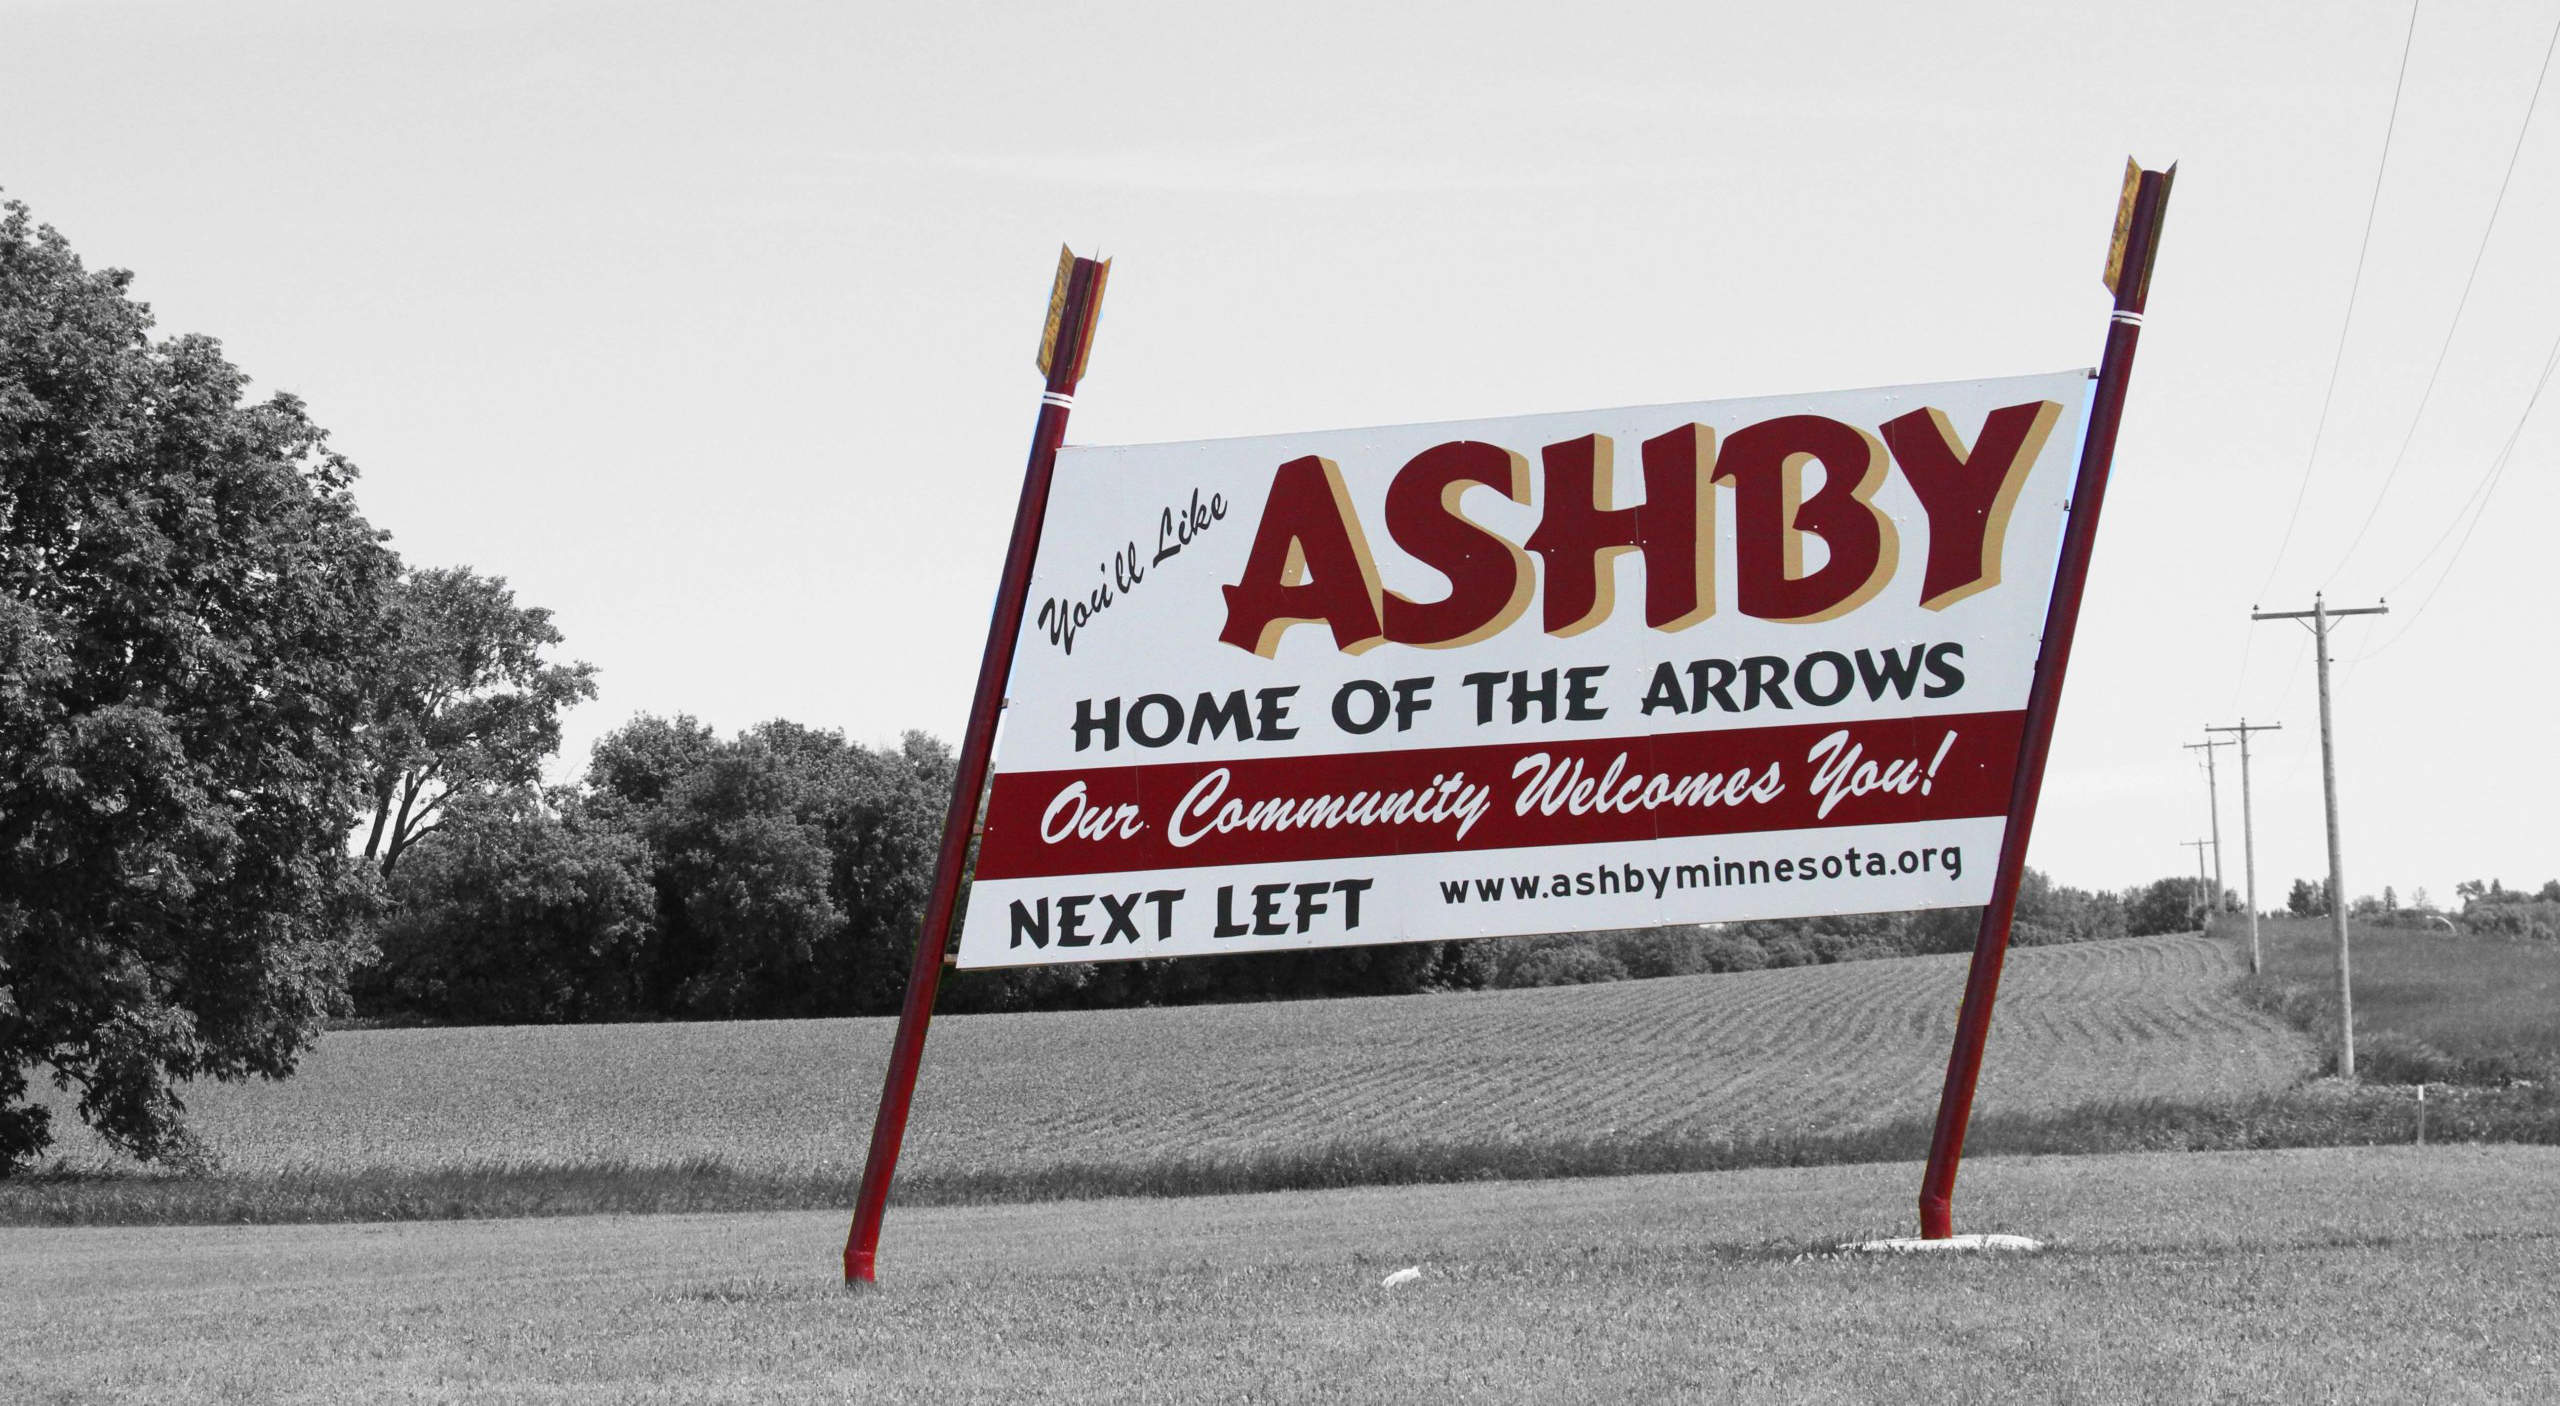 Foundation X helps non profits like the Ashby Legacy Fund to find better ways of doing good.